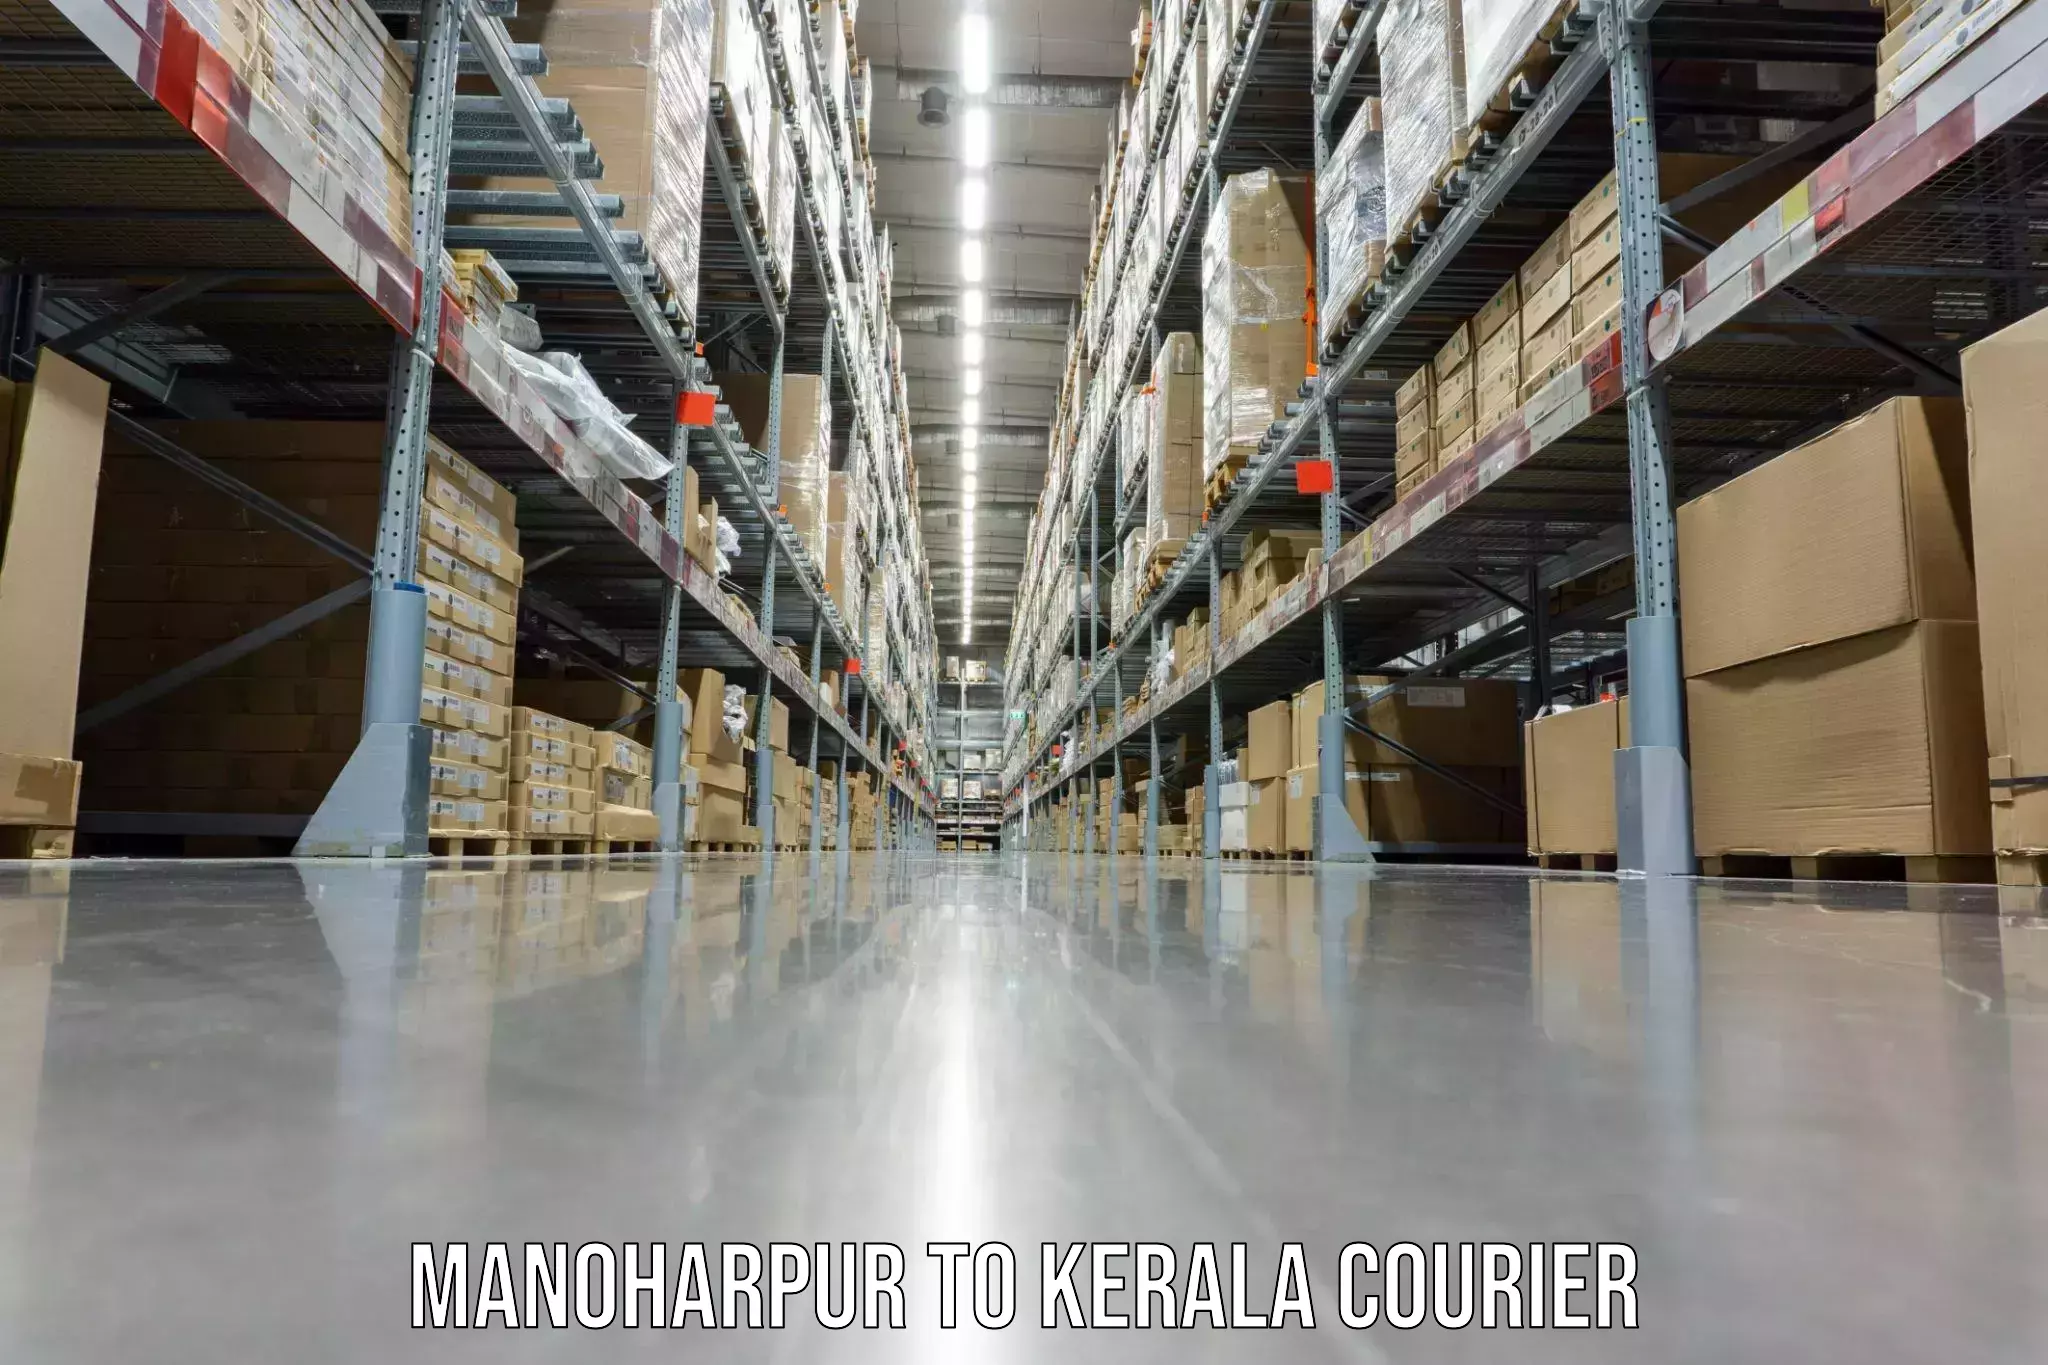 Furniture delivery service Manoharpur to Kottayam